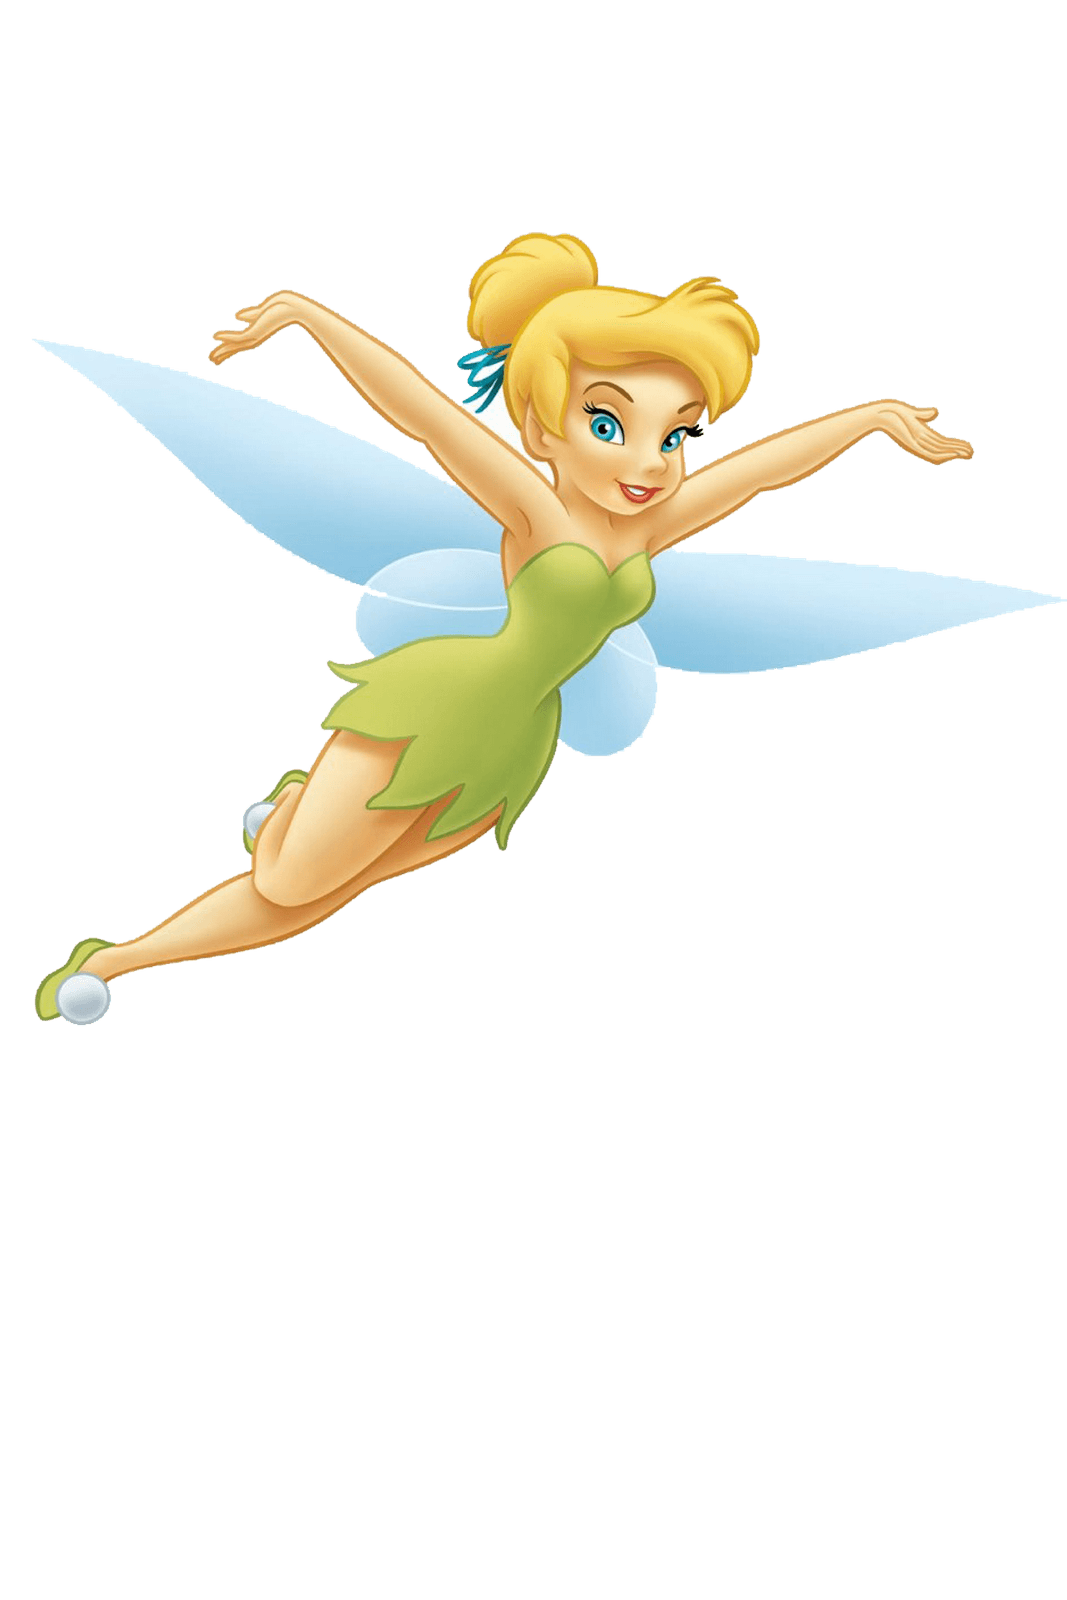 Tinkerbell Backgrounds Twitter - Wallpaper Cave